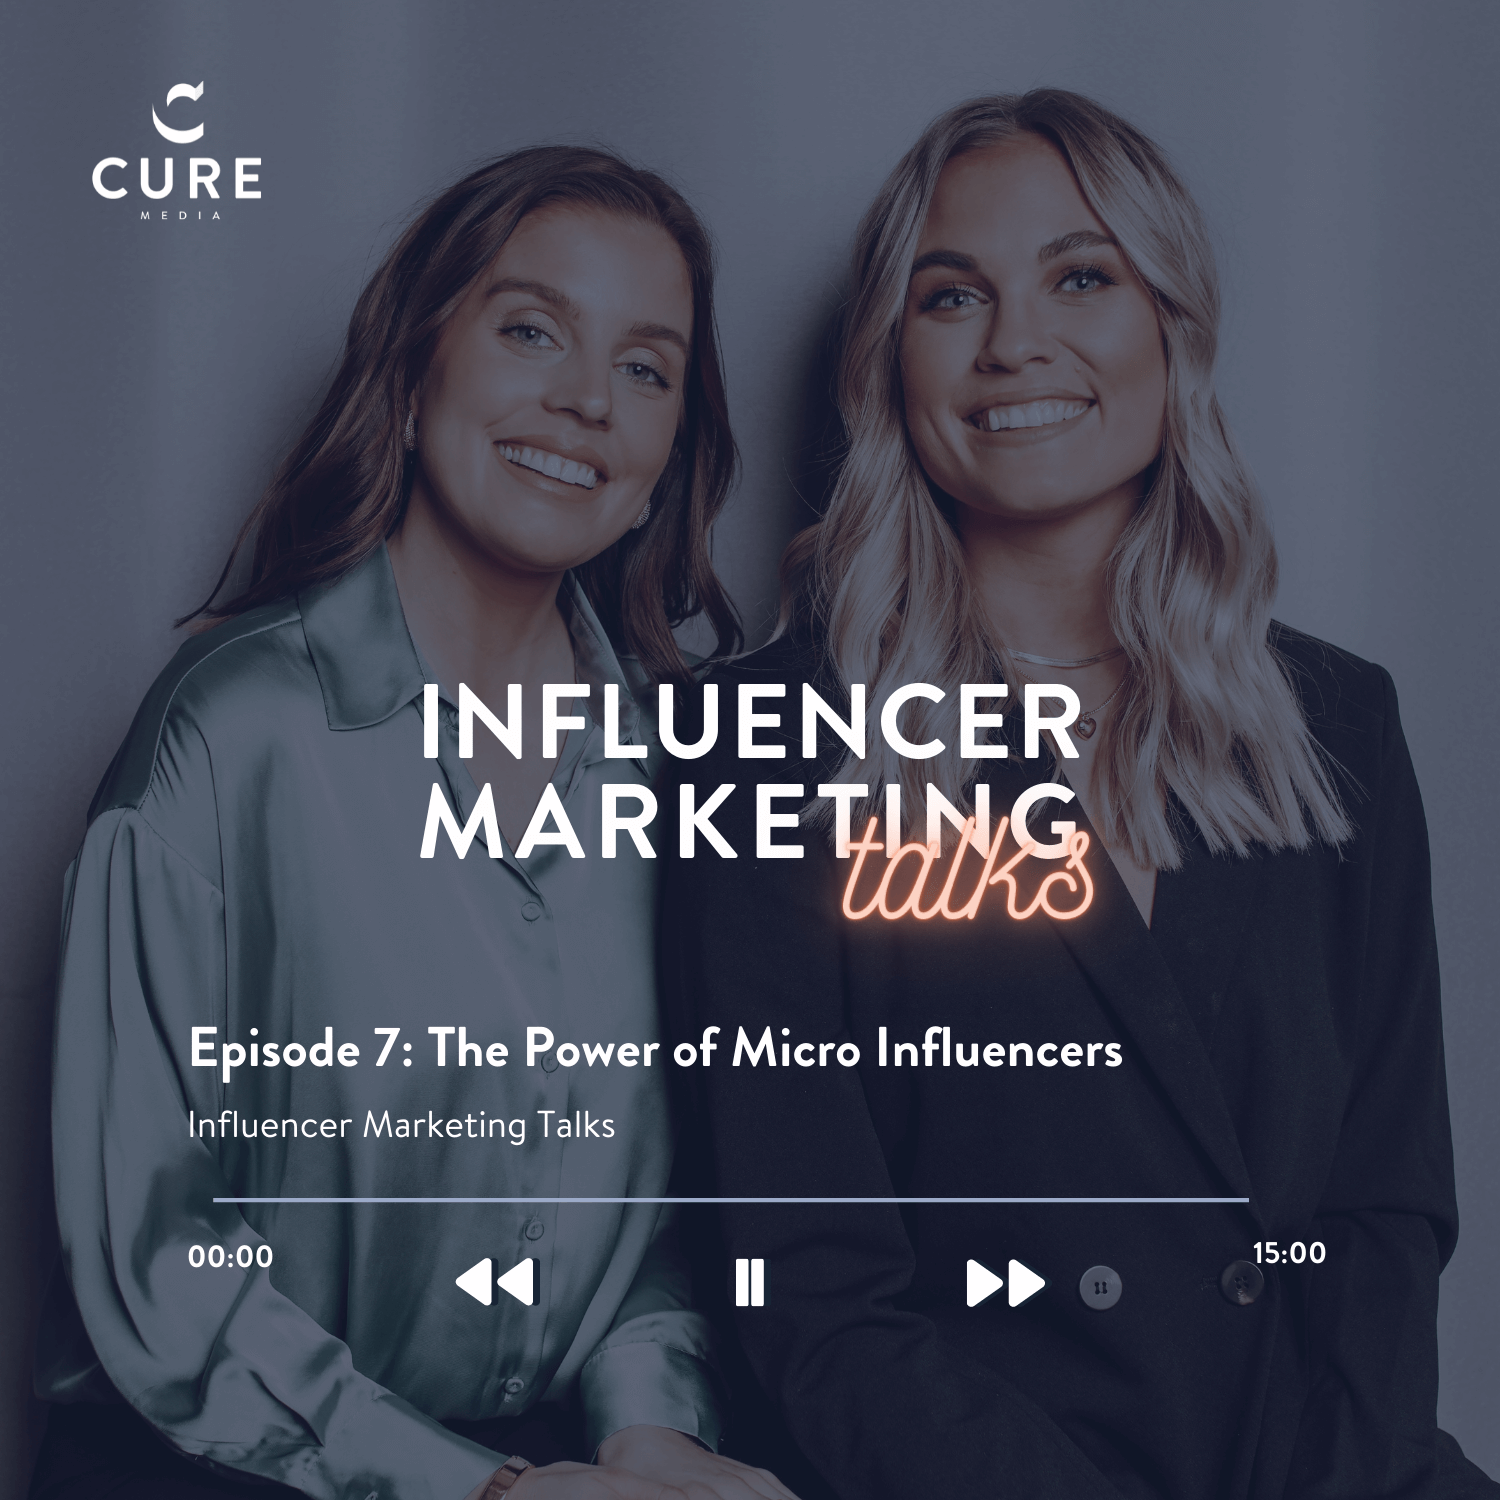 Podcast episode: The Power of Micro Influencers